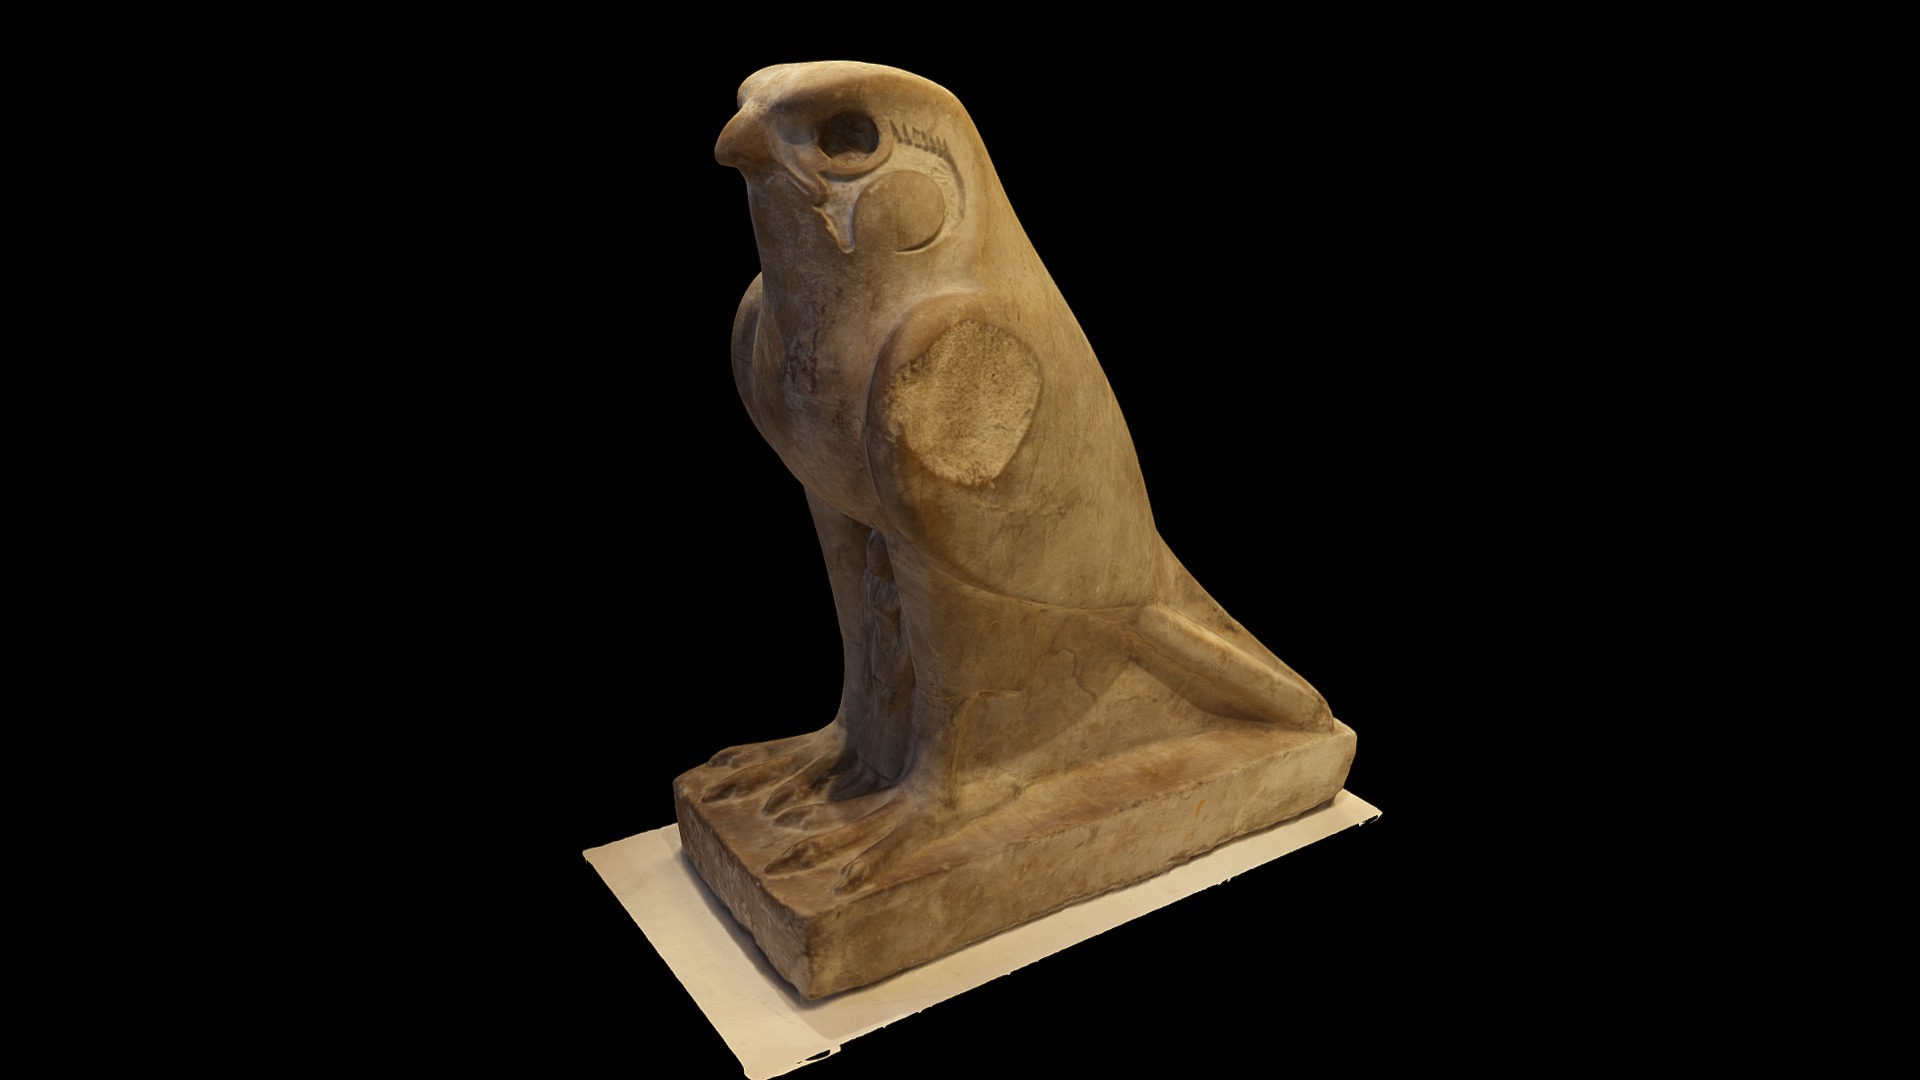 3D model Falcon,ancient Egypt objects at Louvre - This is a 3D model of the Falcon,ancient Egypt objects at Louvre. The 3D model is about a stone sculpture of a bird.